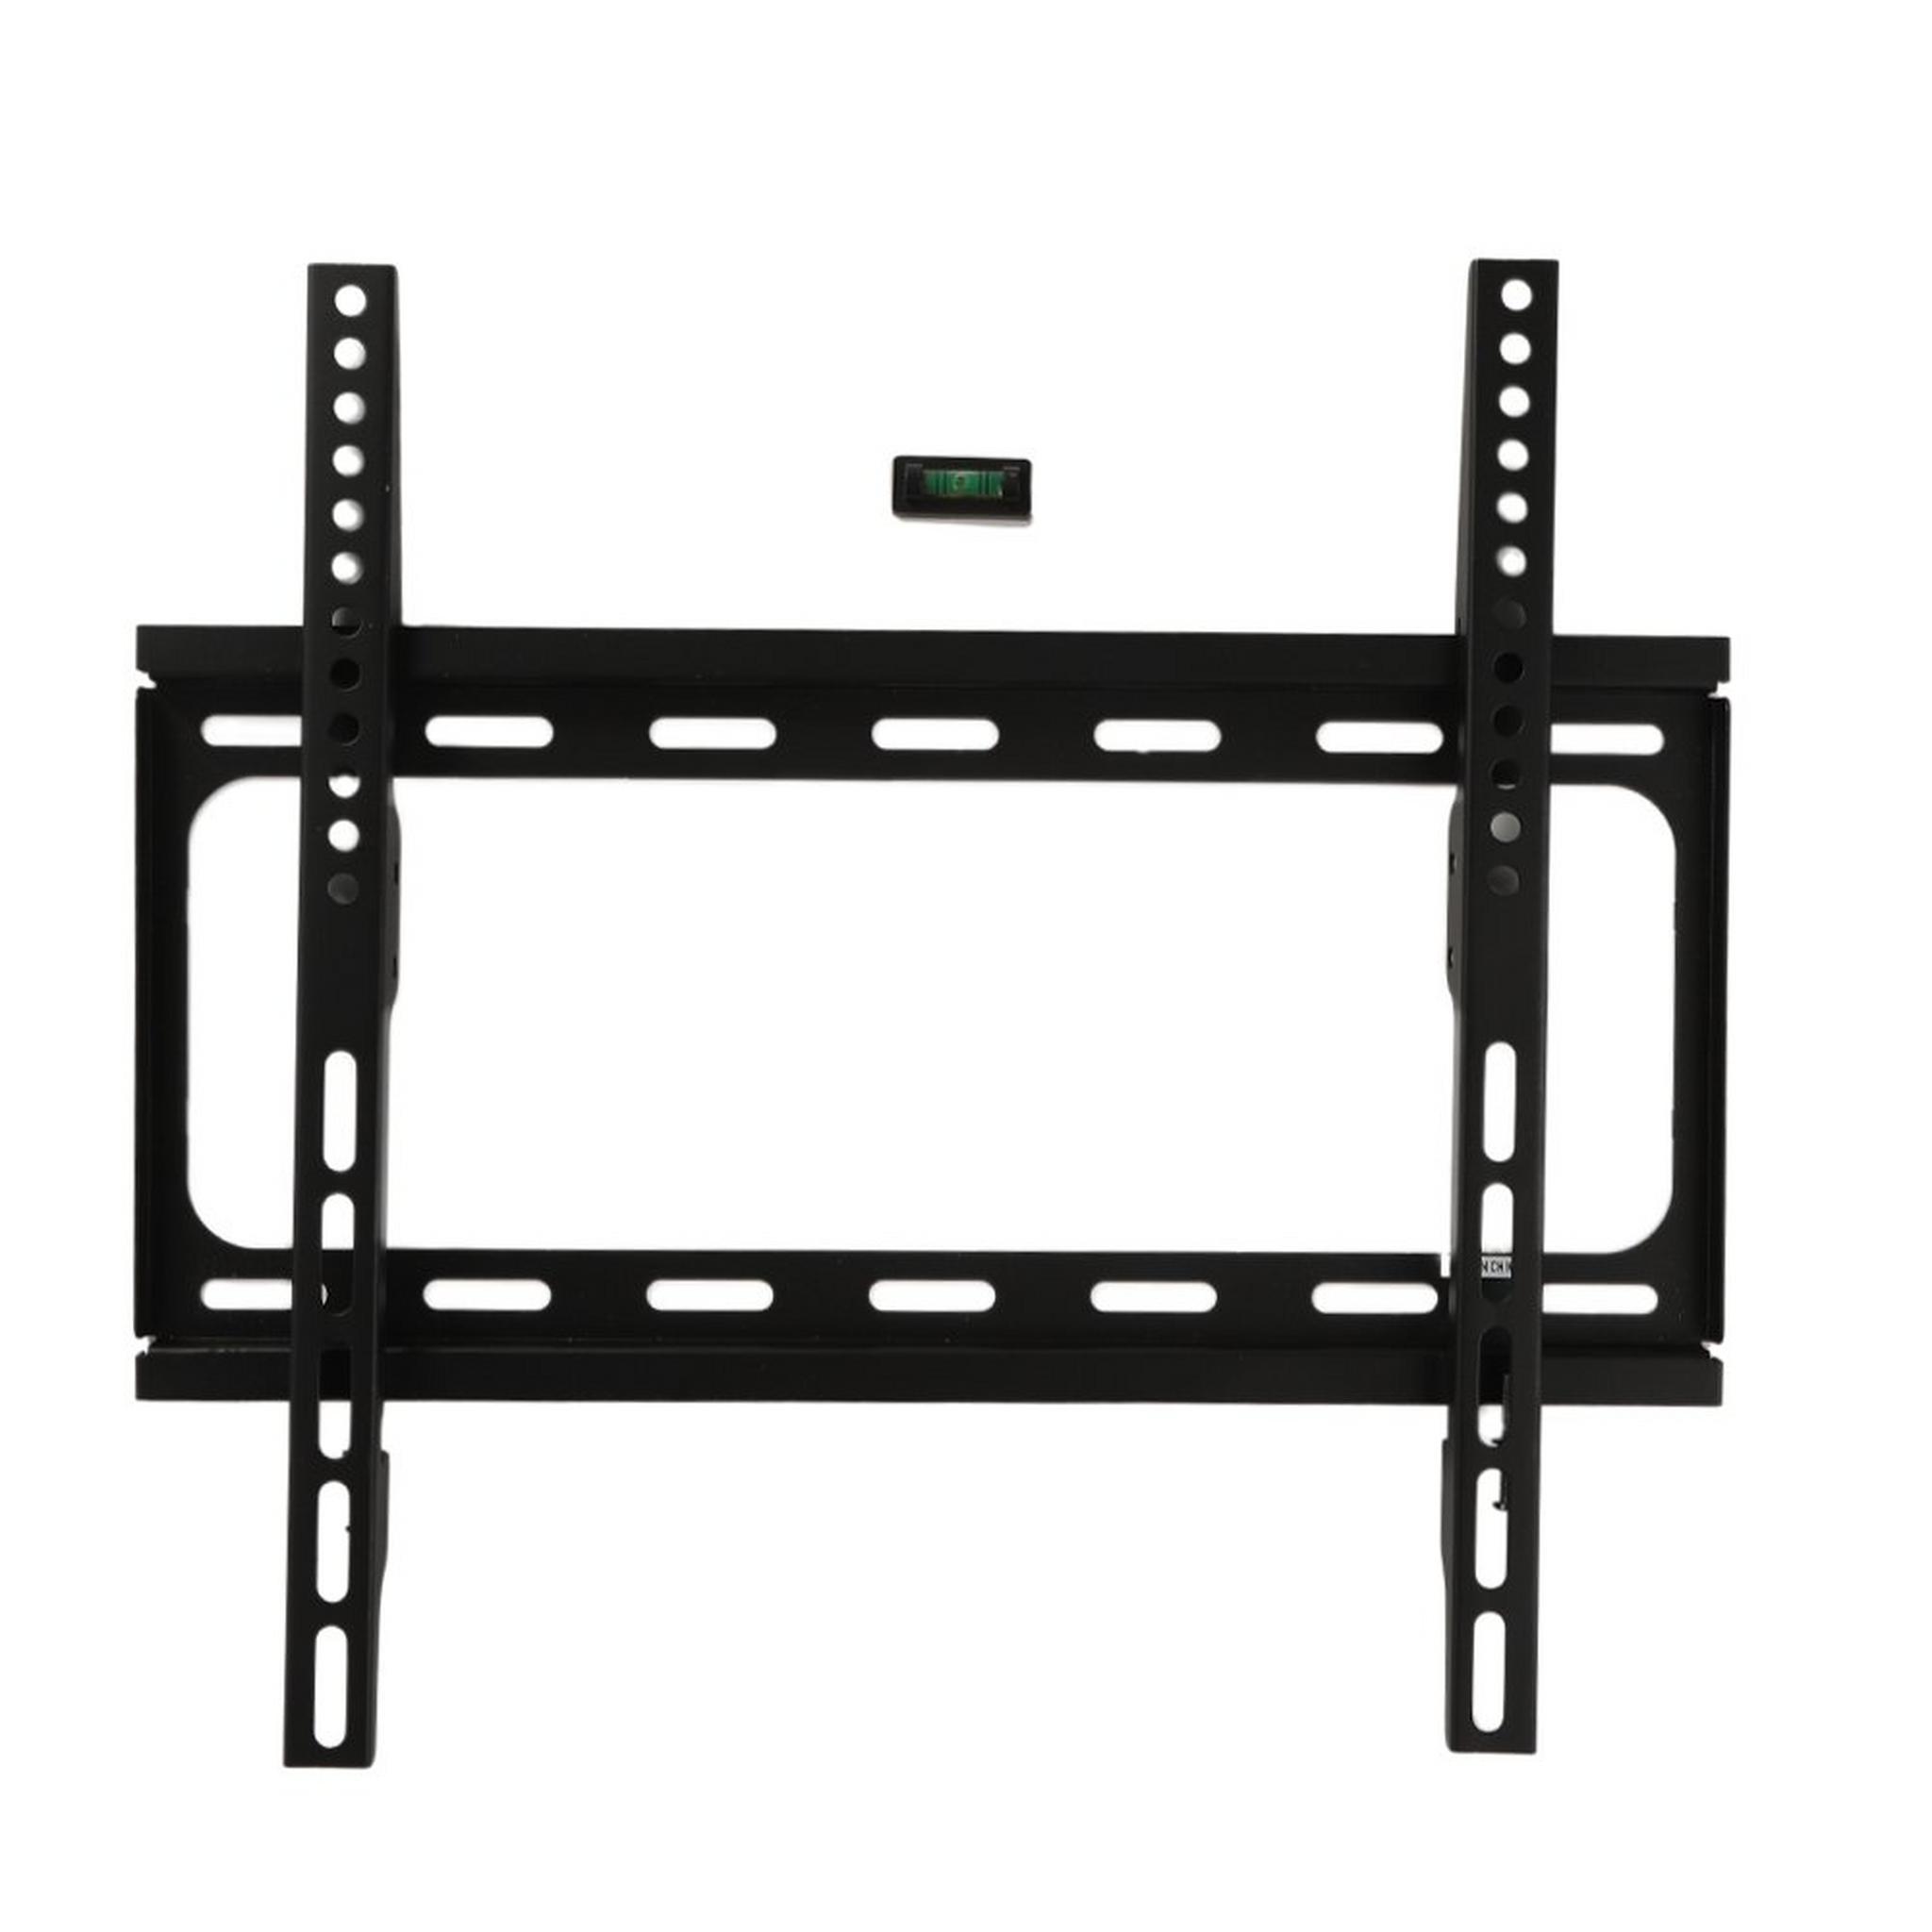 Wansa Fixed Wall Bracket for 26 to 50-inch TVs - (PSW698SF) Black